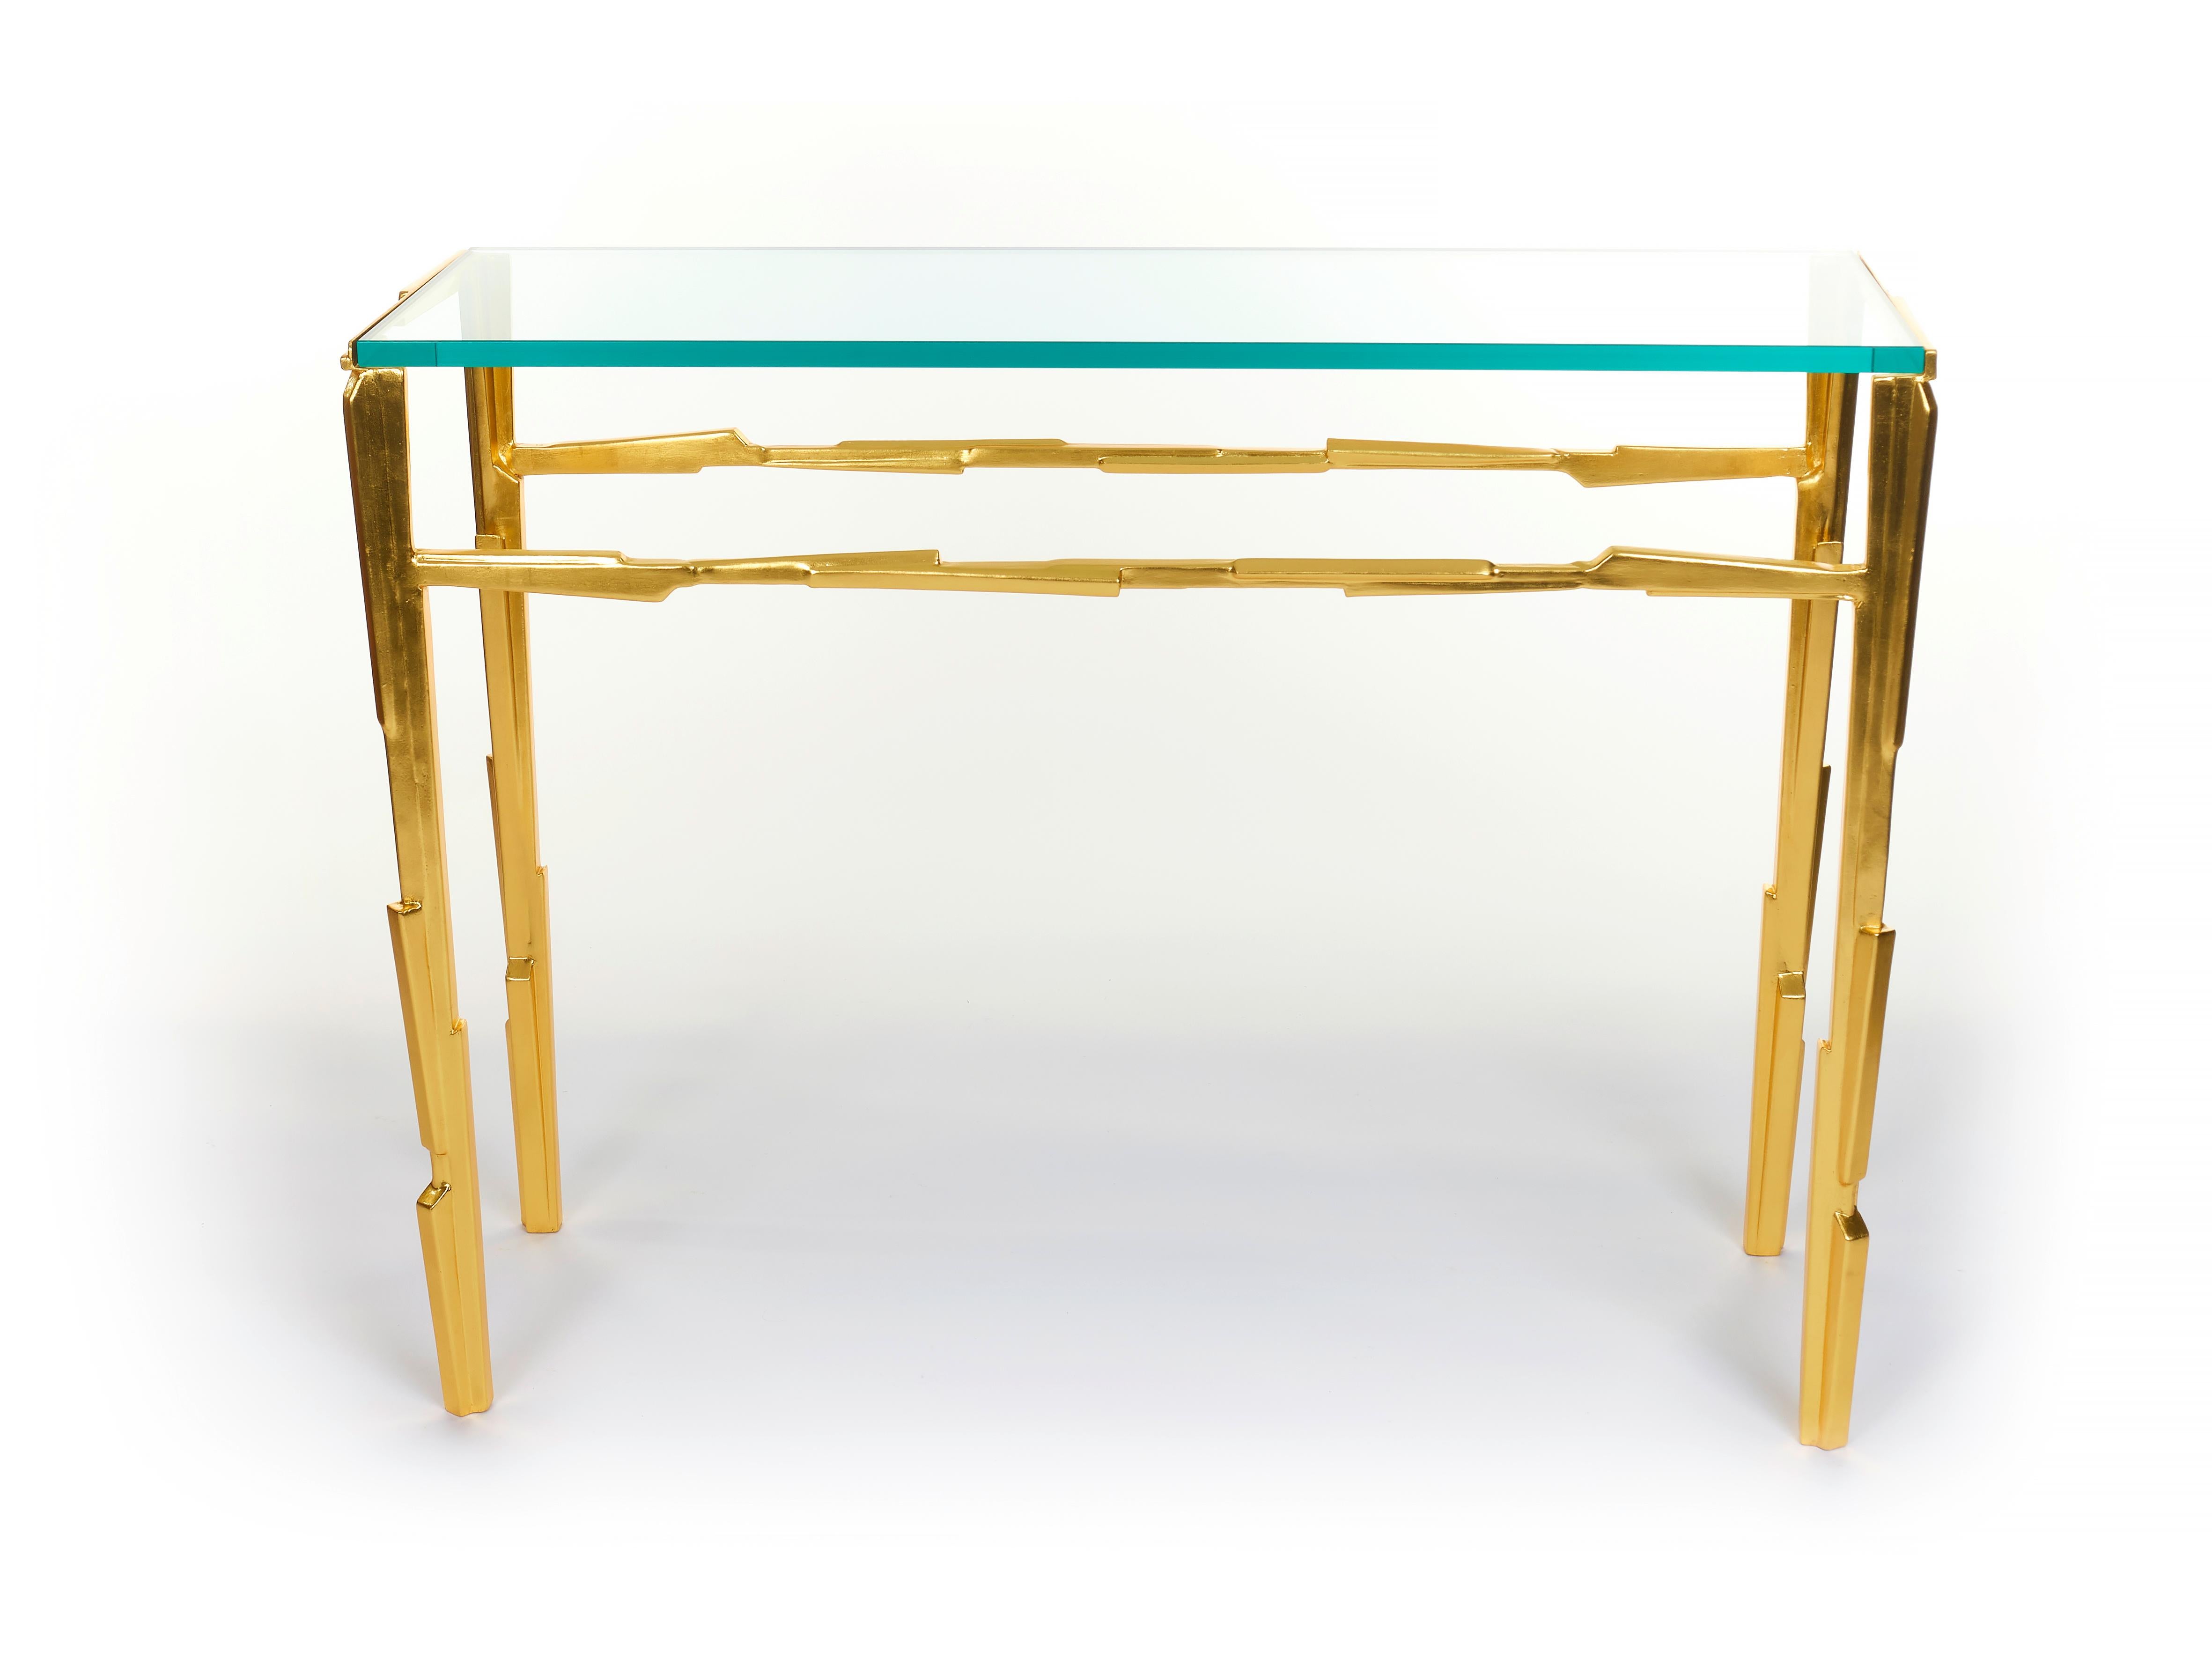 Linea Console table gilded with 23K Yellow Gold and clear glass top. Fragments of metal, shaped and assembled in line with a secret sense of order. As our furniture is hand-crafted, this piece can be custom made to any  size or proportion to suit